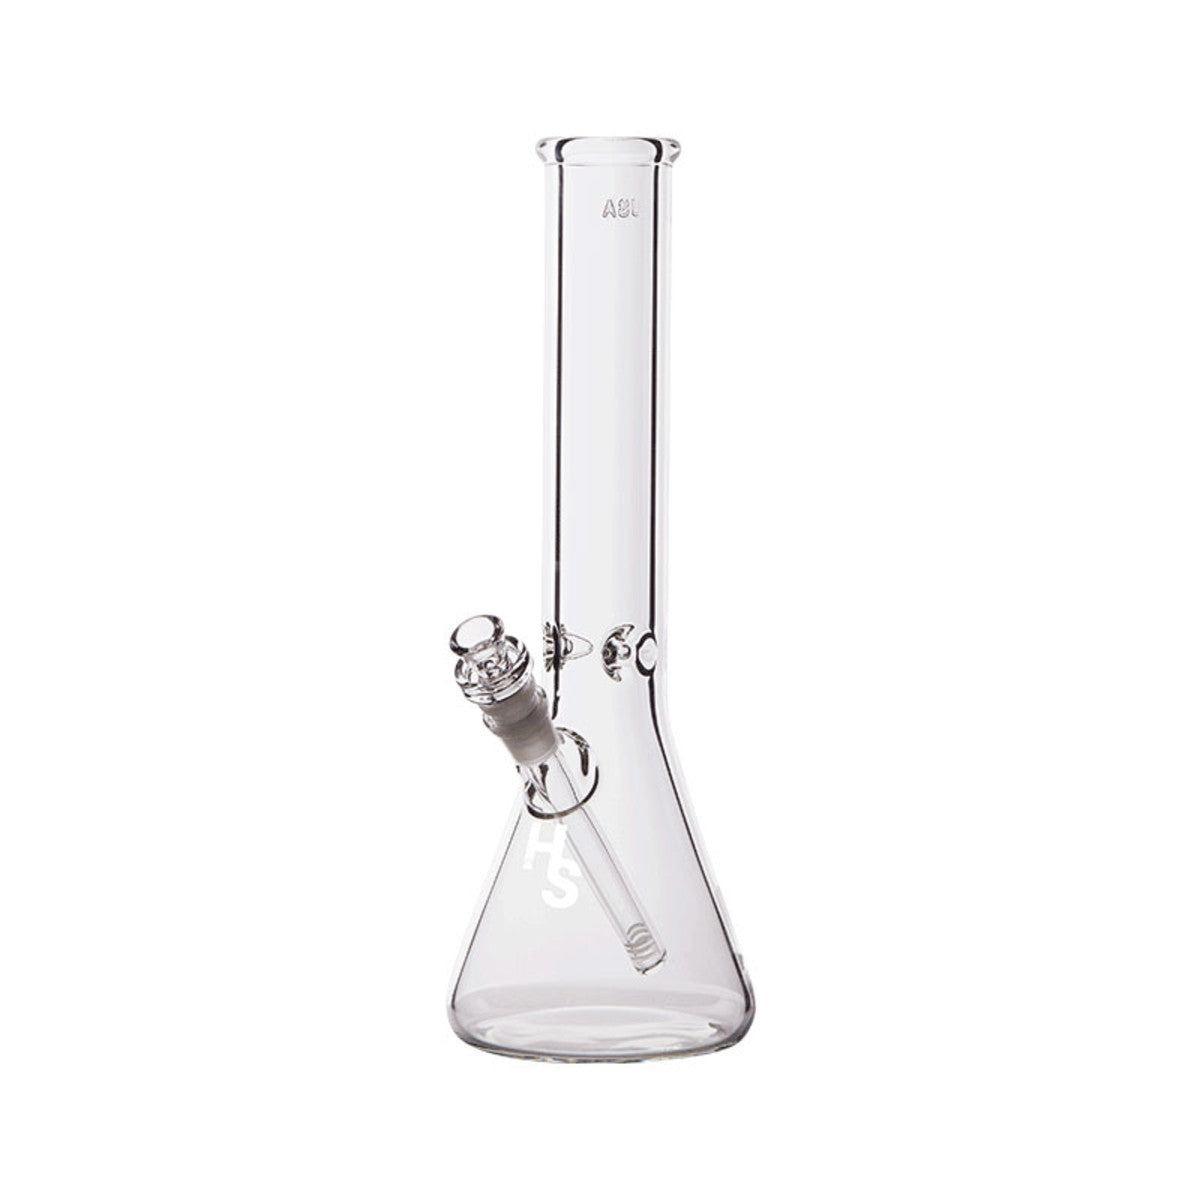 Higher Standards Heavy Duty Beaker. Handcrafted from Durable Medical-Grade Borosilicate Glass, the Heavy Duty Beaker is a Water Pipe Engineered to Rip with Maximum Filtration. Top Shelf CBD Hemp Flower. MOST DIVERSE CBD CONCENTRATE COLLECTION ON THE WEB. Live Resin, Wax, Shatter, Crumble, Diamonds &amp;MORE! Glass Rigs, Pipes. Dab, Vape, Smoke Accessories - Sauce Warehouse